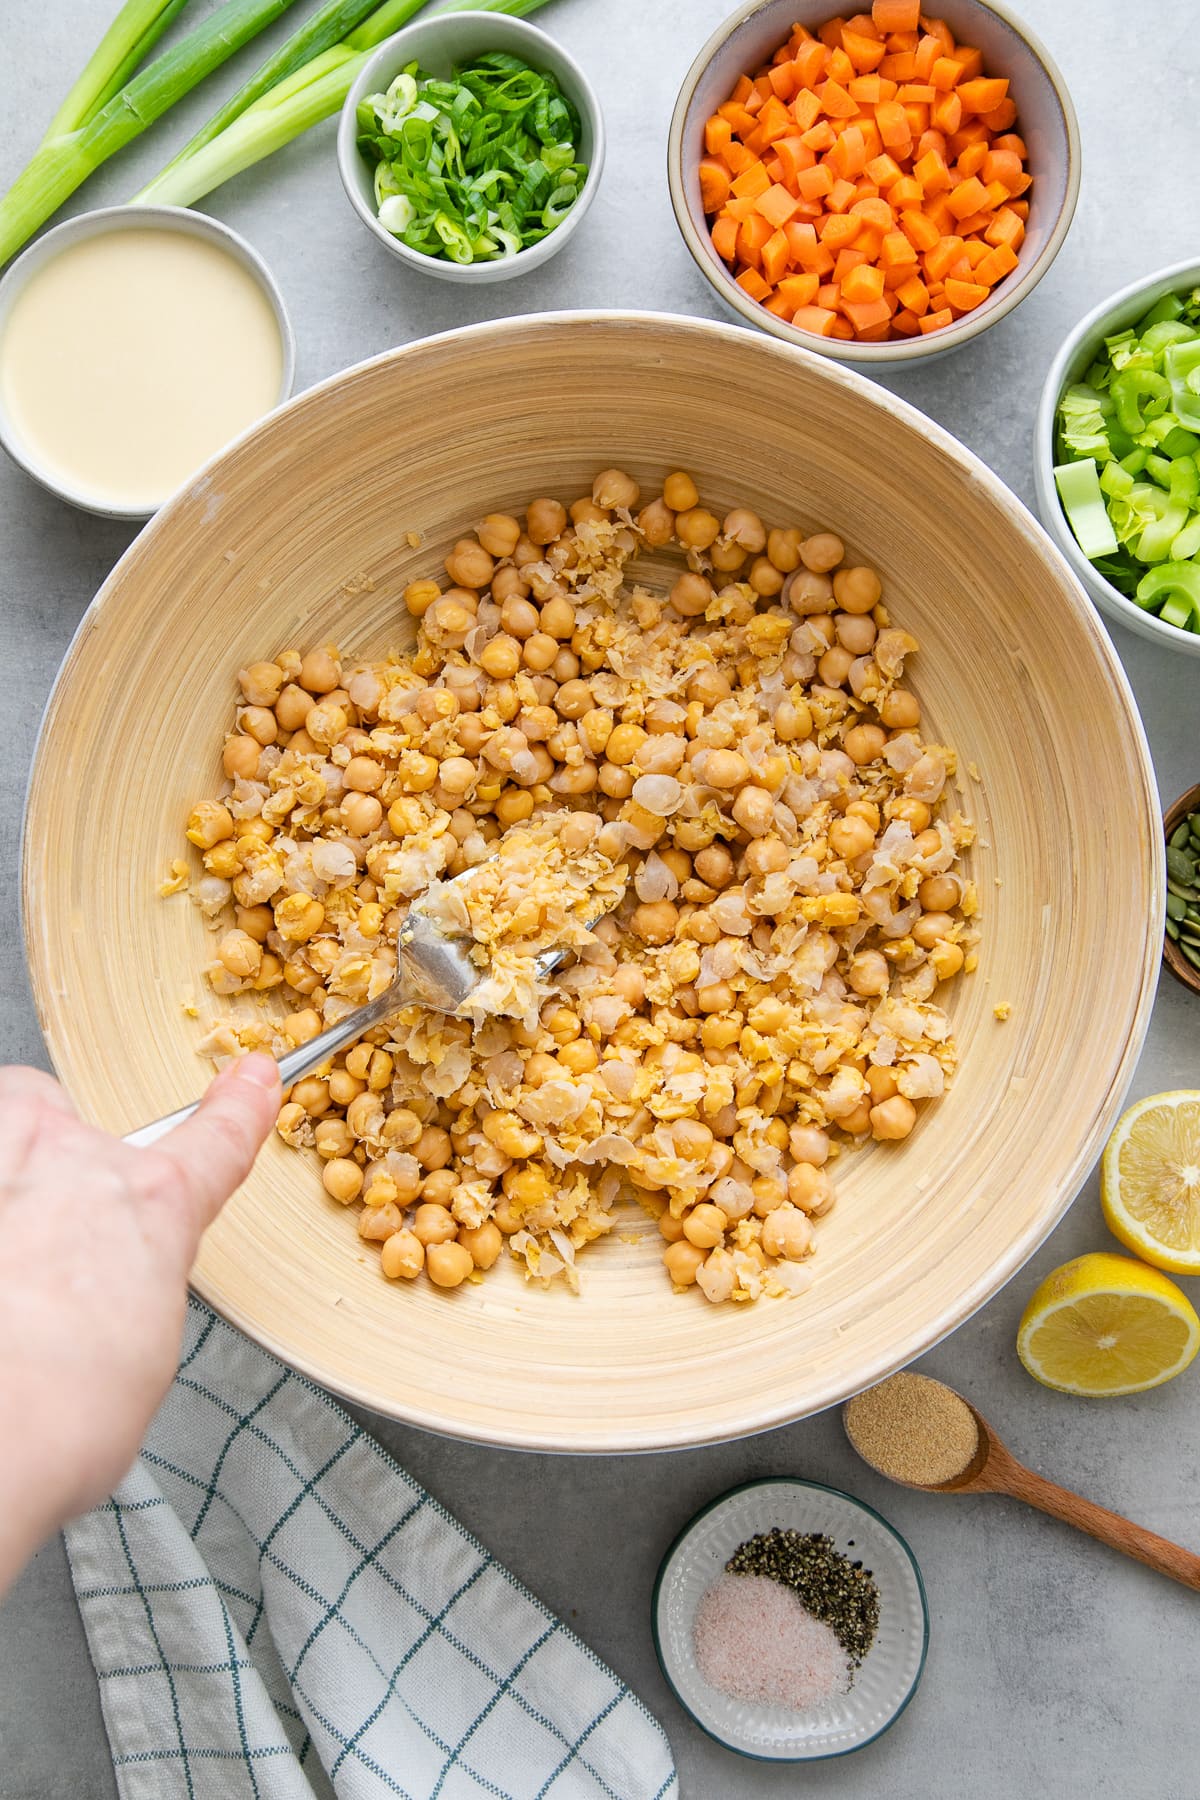 top down view showing the process of mashing chickpeas in a bowl with items surrounding.